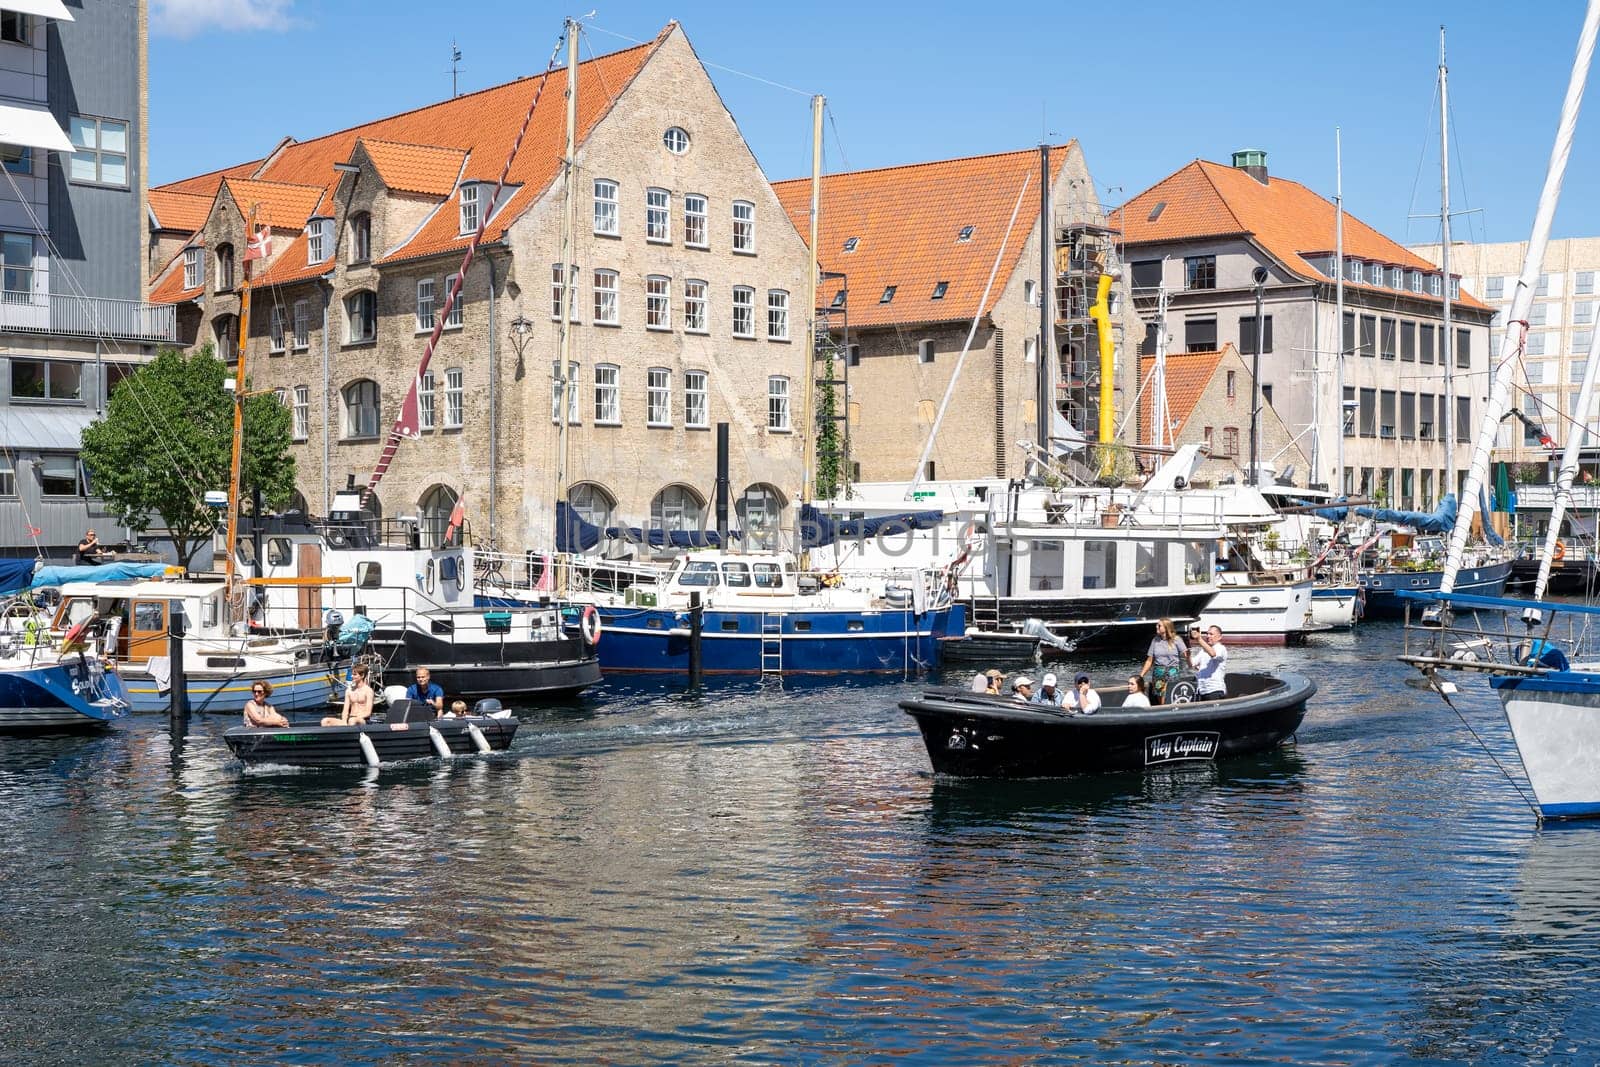 Copenhagen, Denmark - July 12, 2022: A canal and boats in Christianshavn district in the historic city centre.